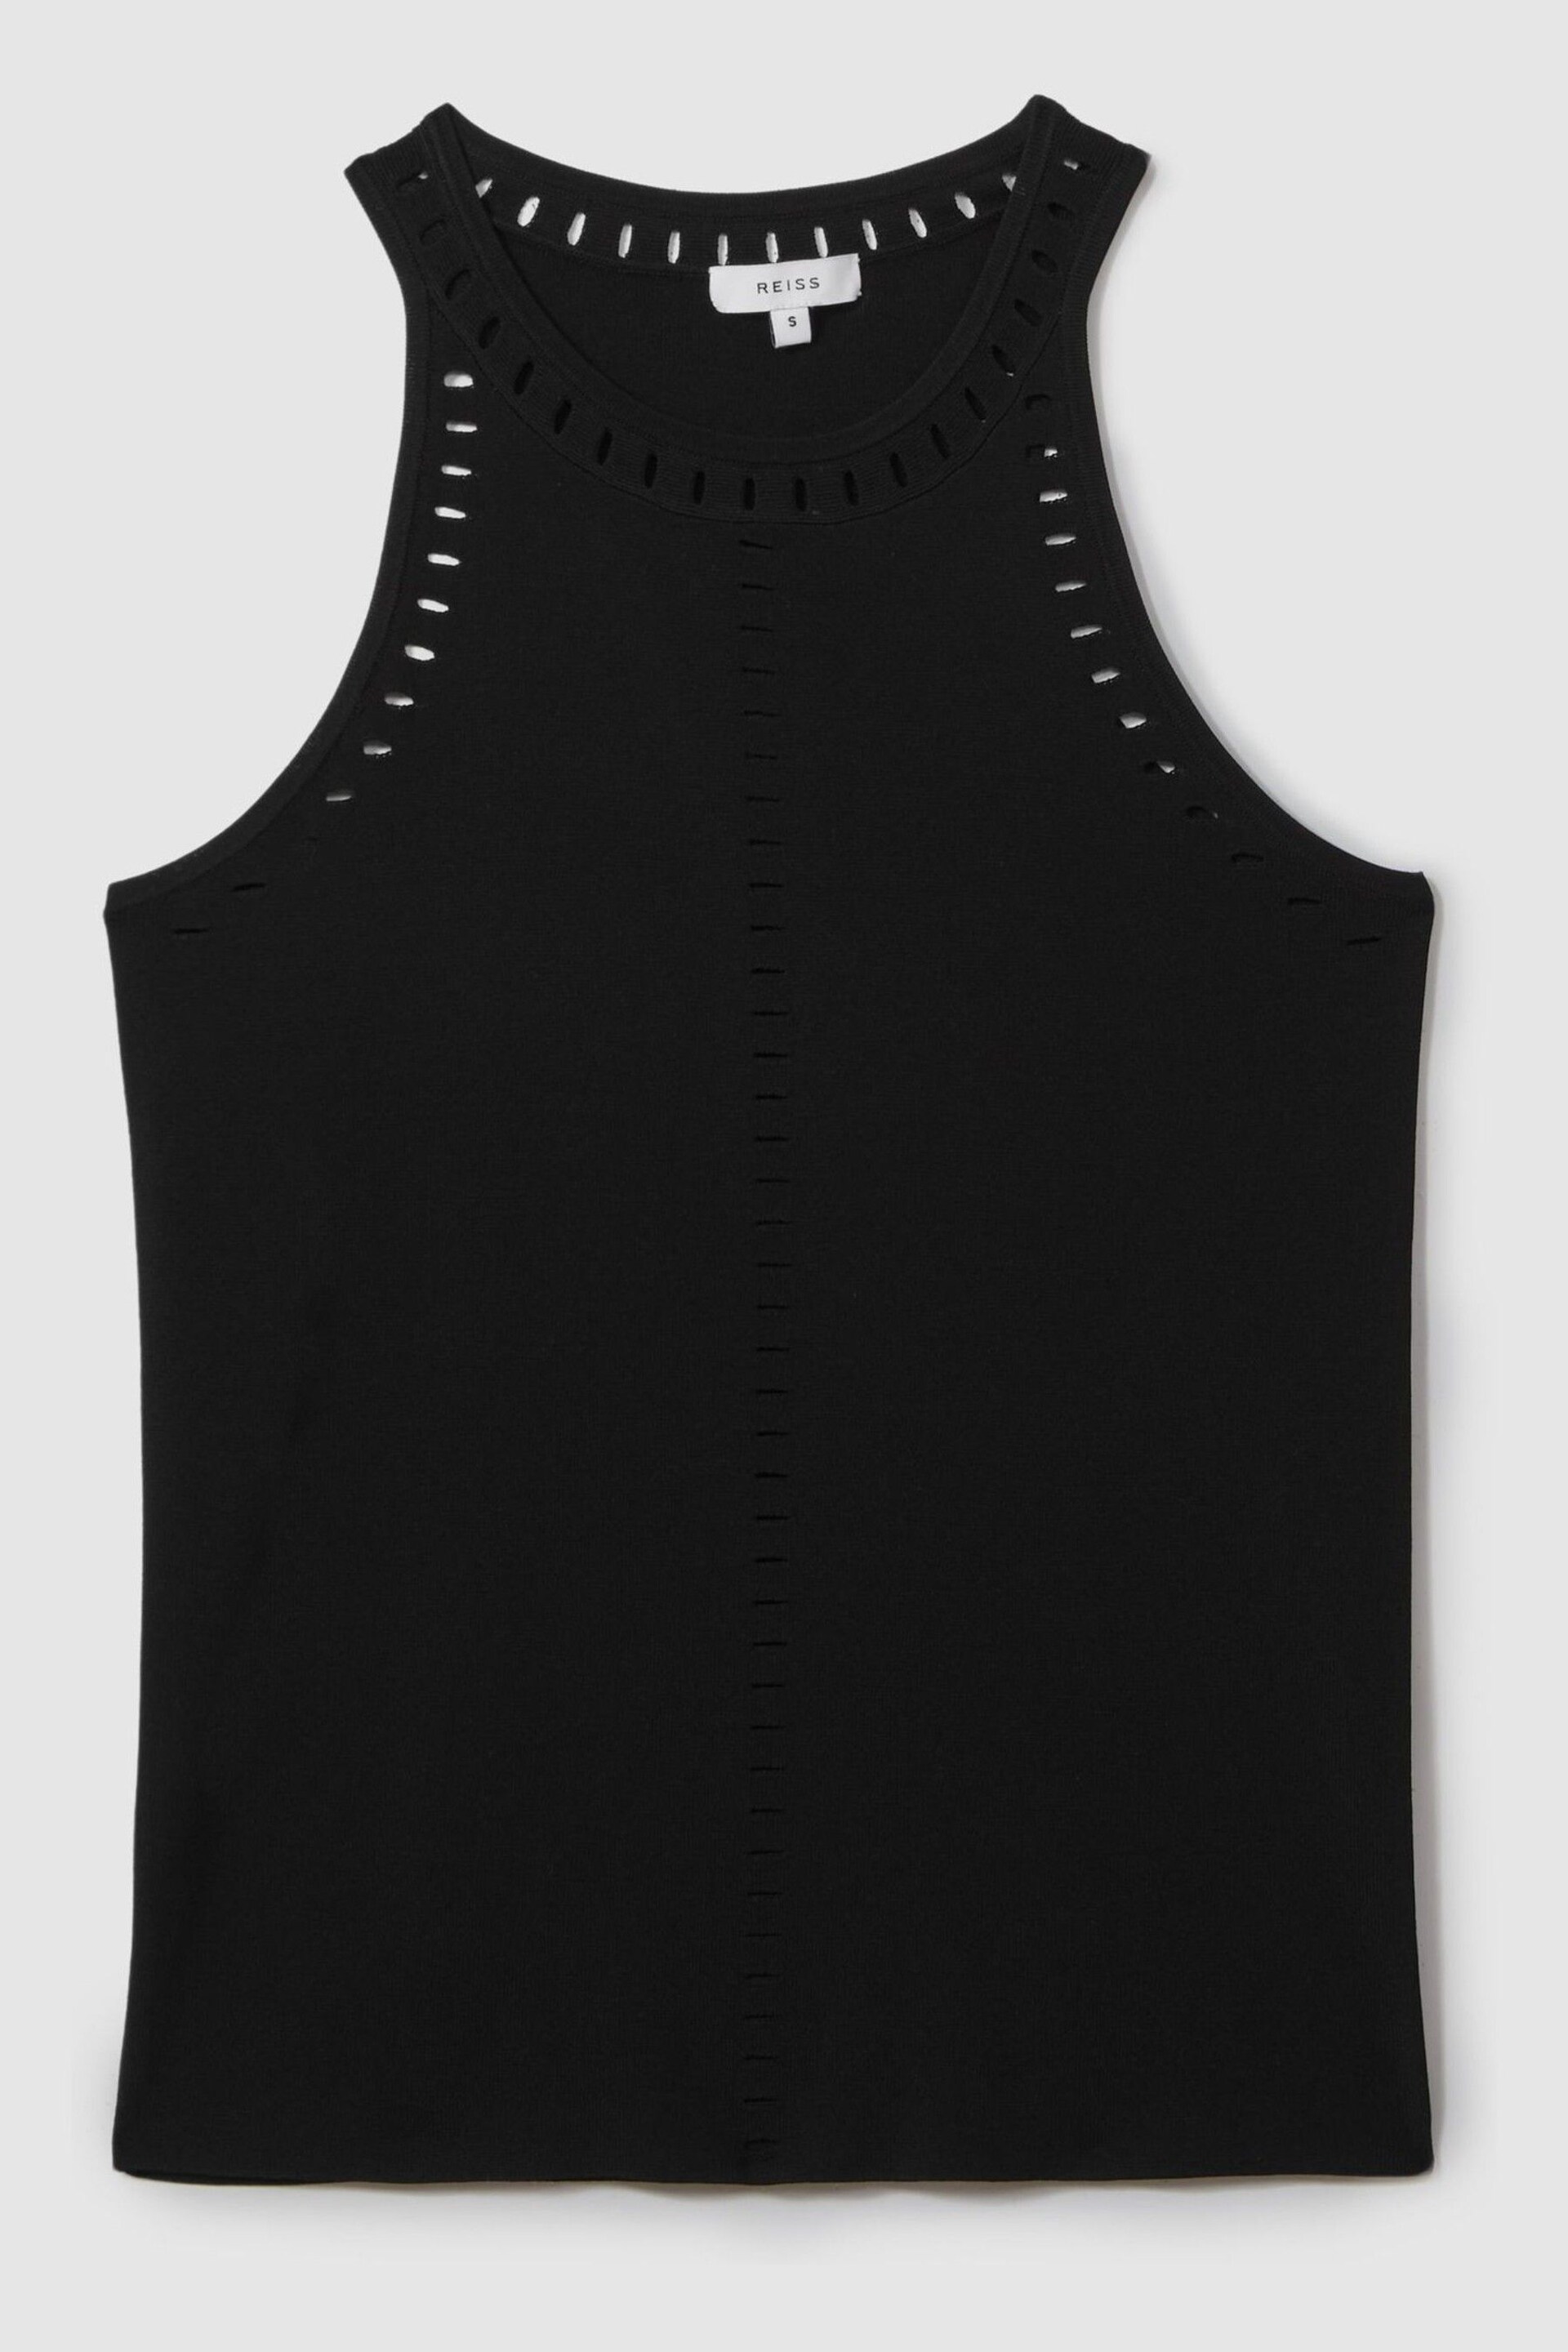 Reiss Black Cammi Fitted Cut-Out Detail Vest - Image 2 of 5